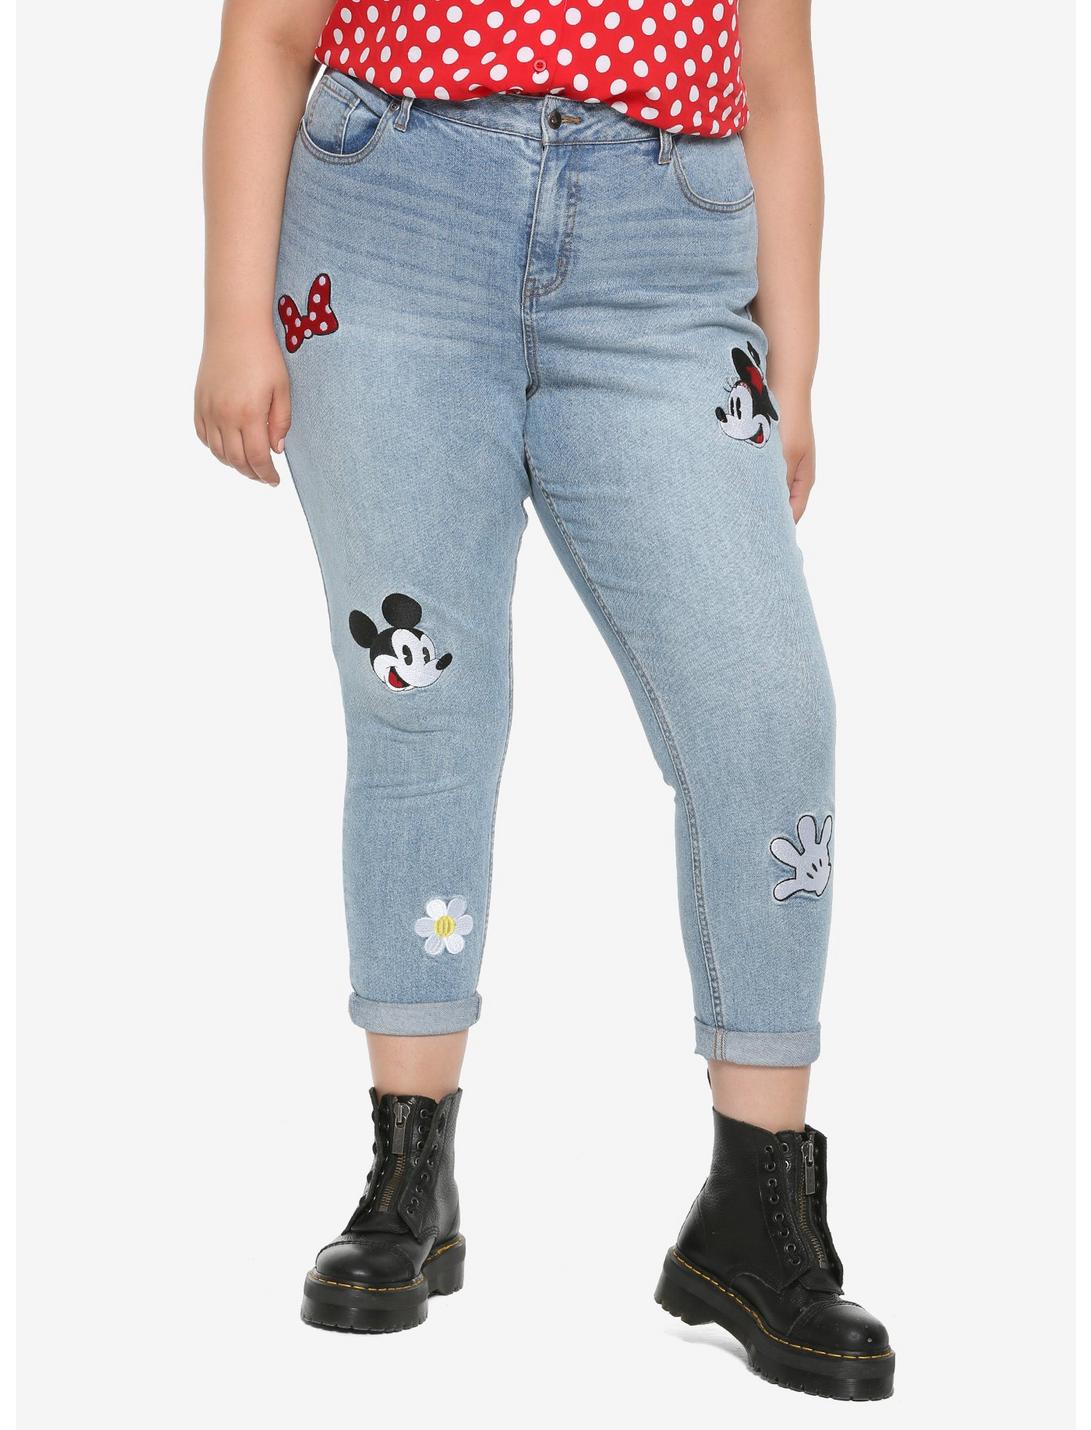 Her Universe Disney Minnie Mouse & Mickey Mouse Embroidered Mom Jeans Plus Size, INDIGO, hi-res